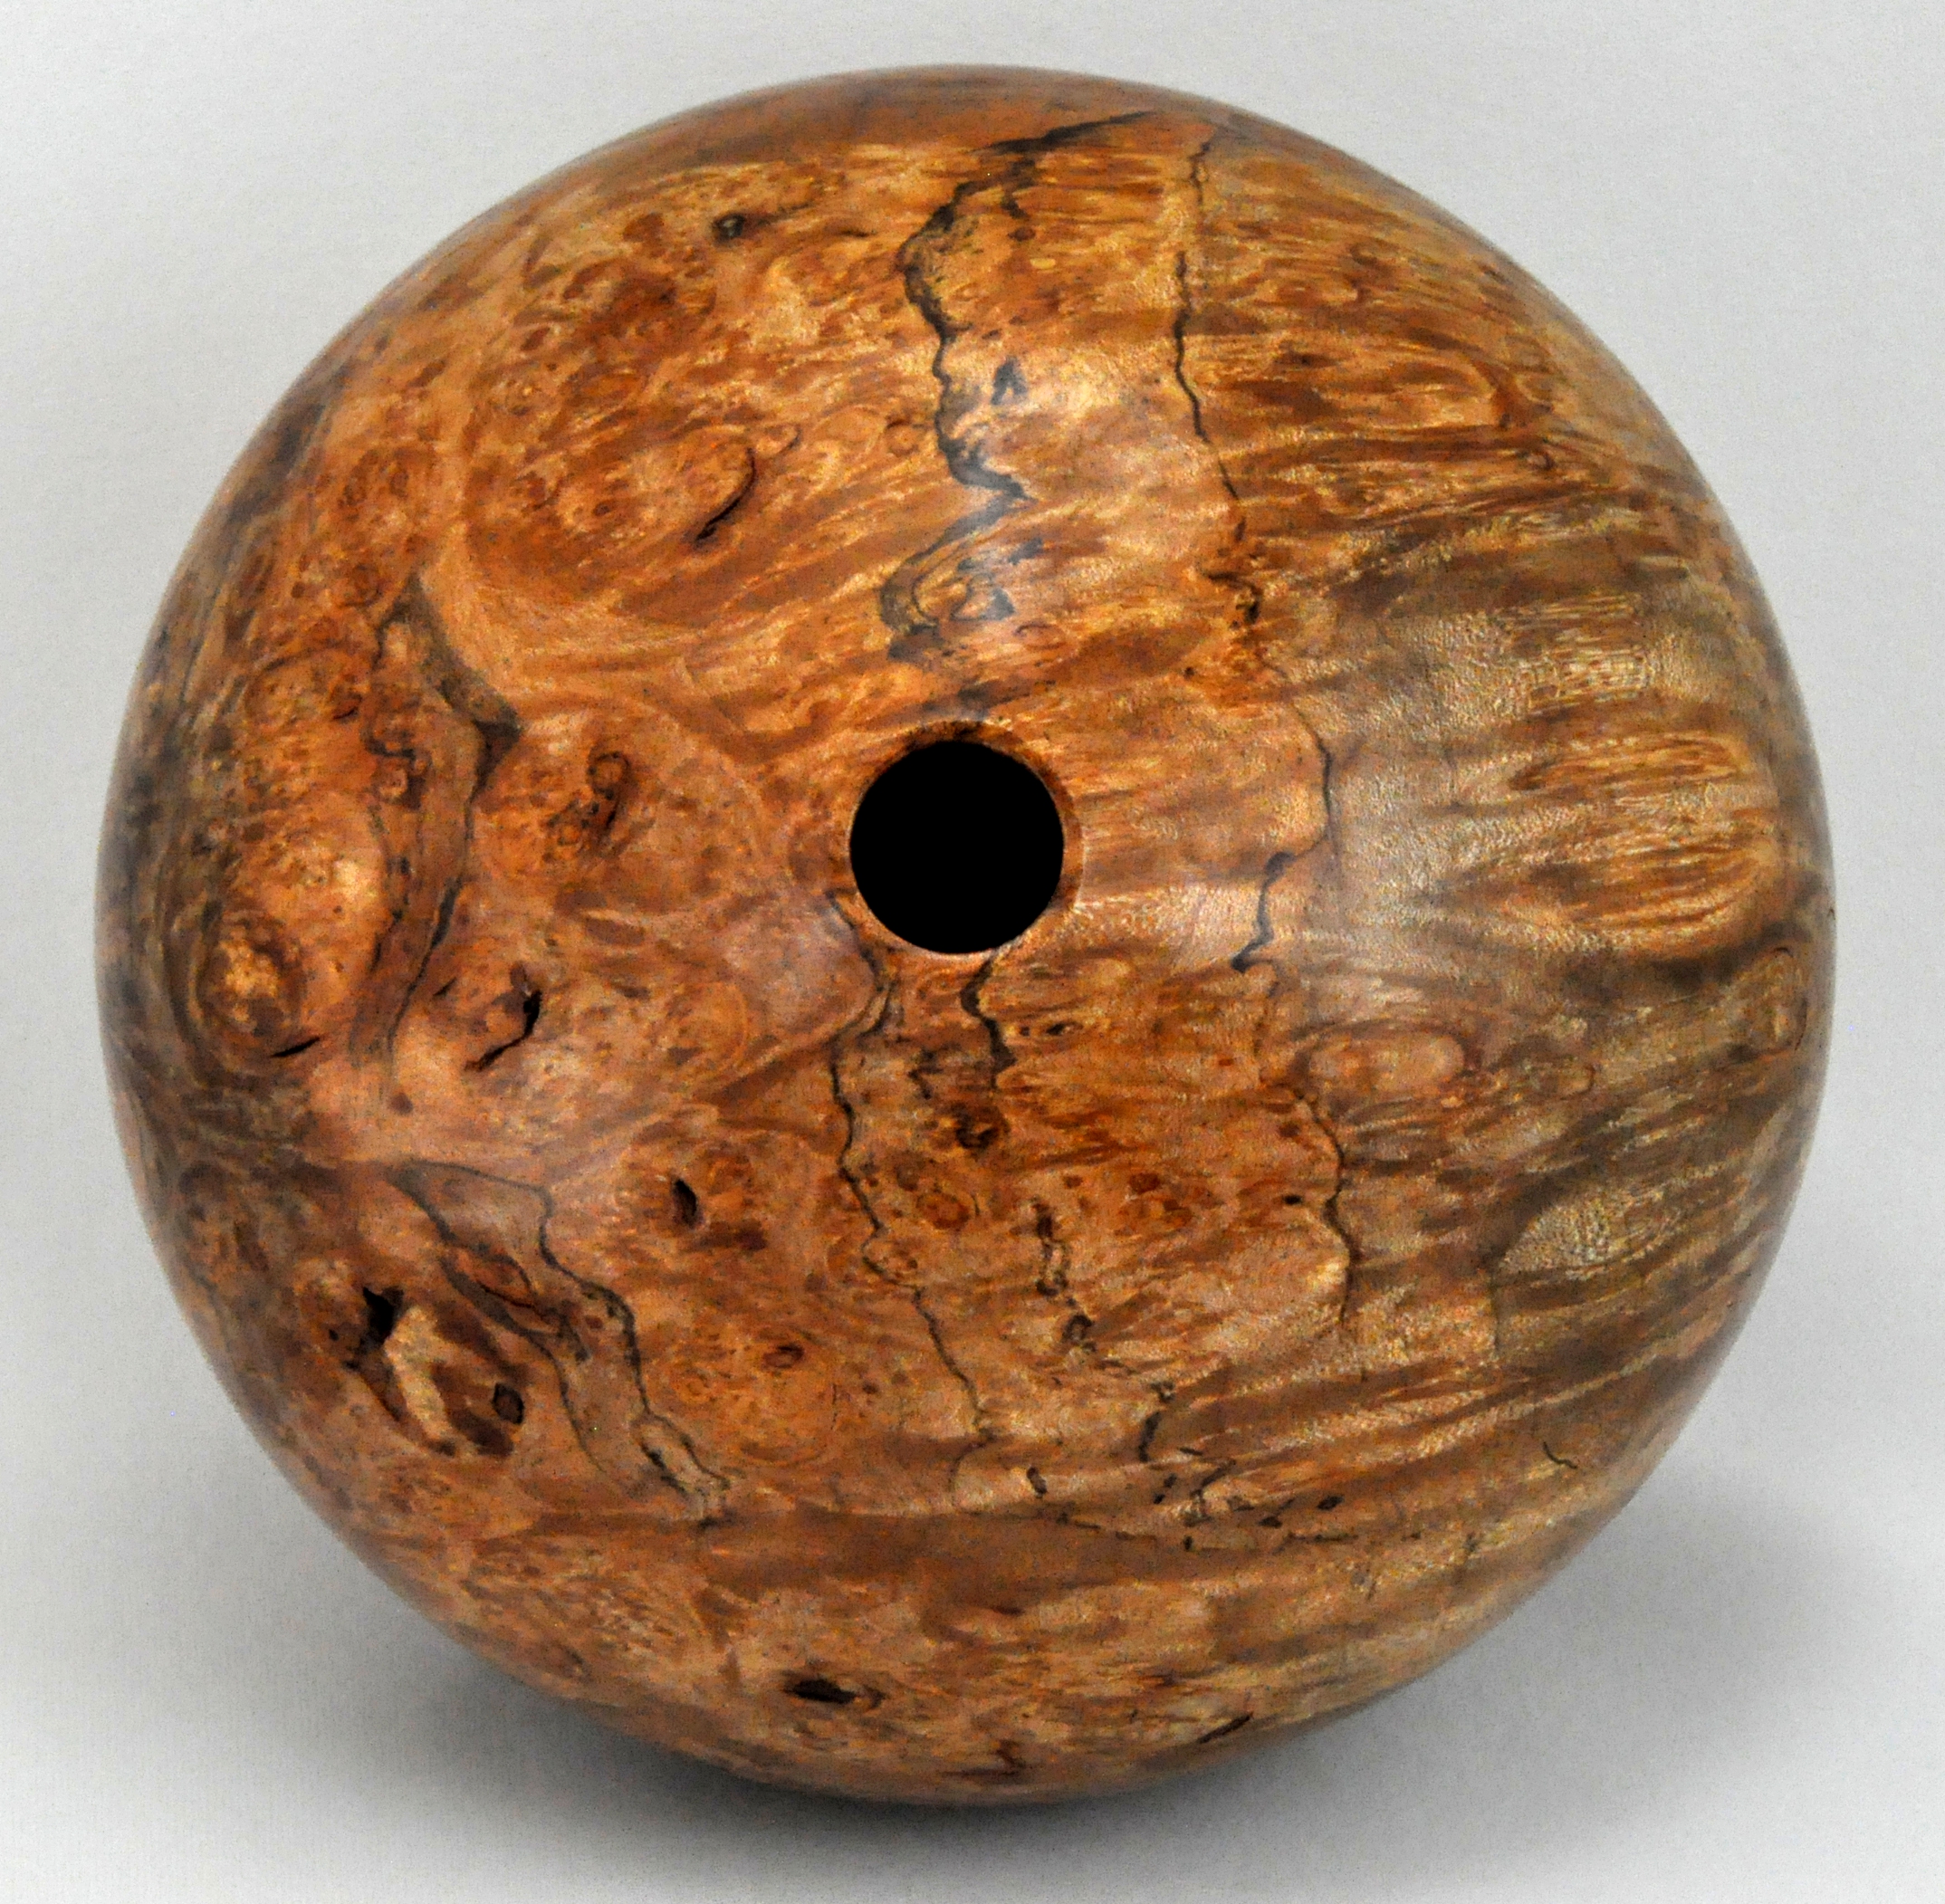 Mike Jackofsky - Maple Burl Hollow Form